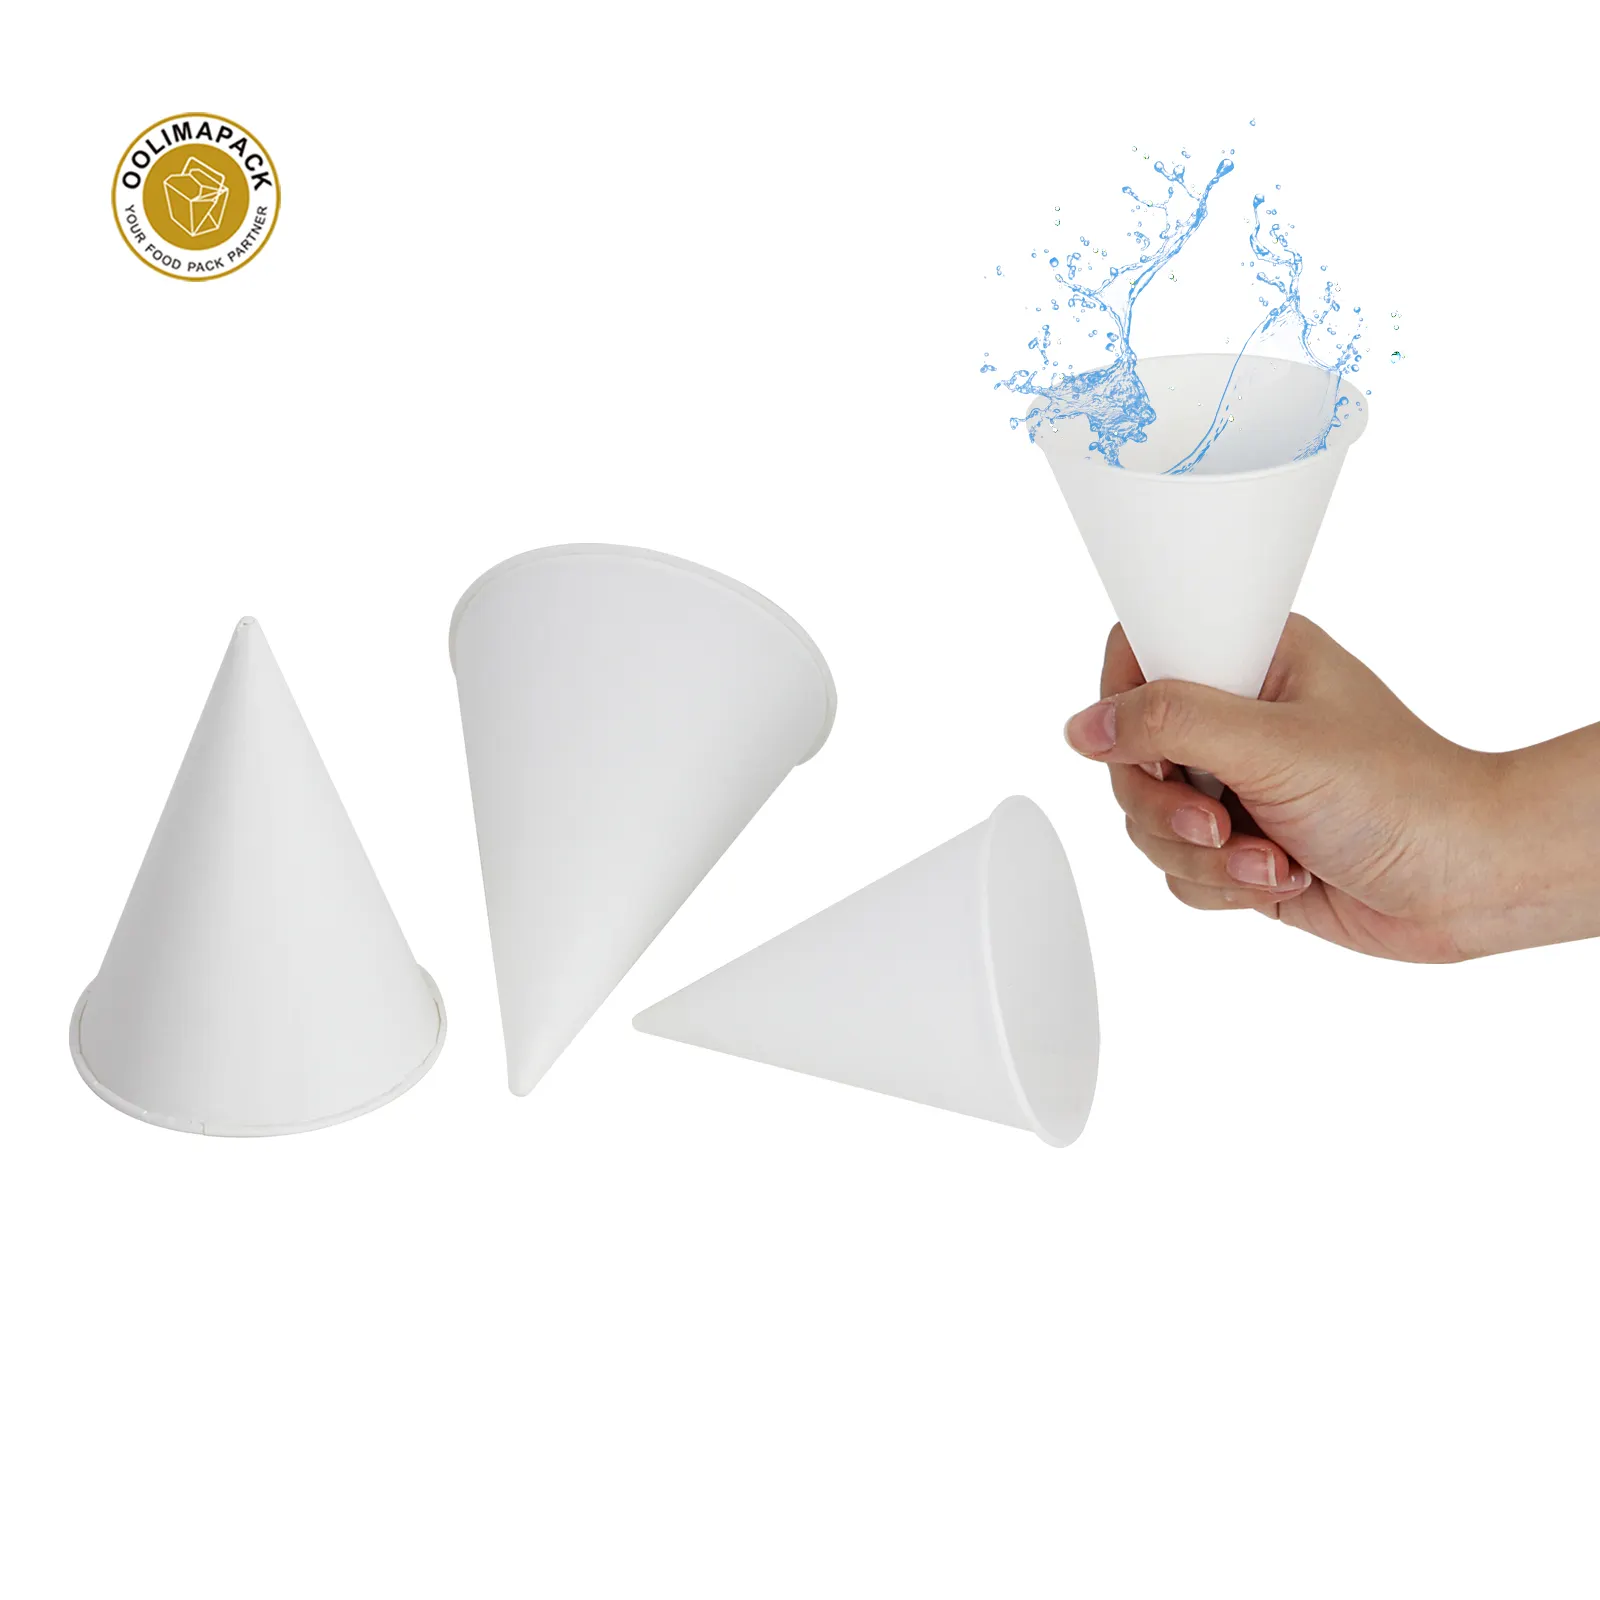 OOLIMA Biodegradable Disposable Cone Shaped Paper Cups